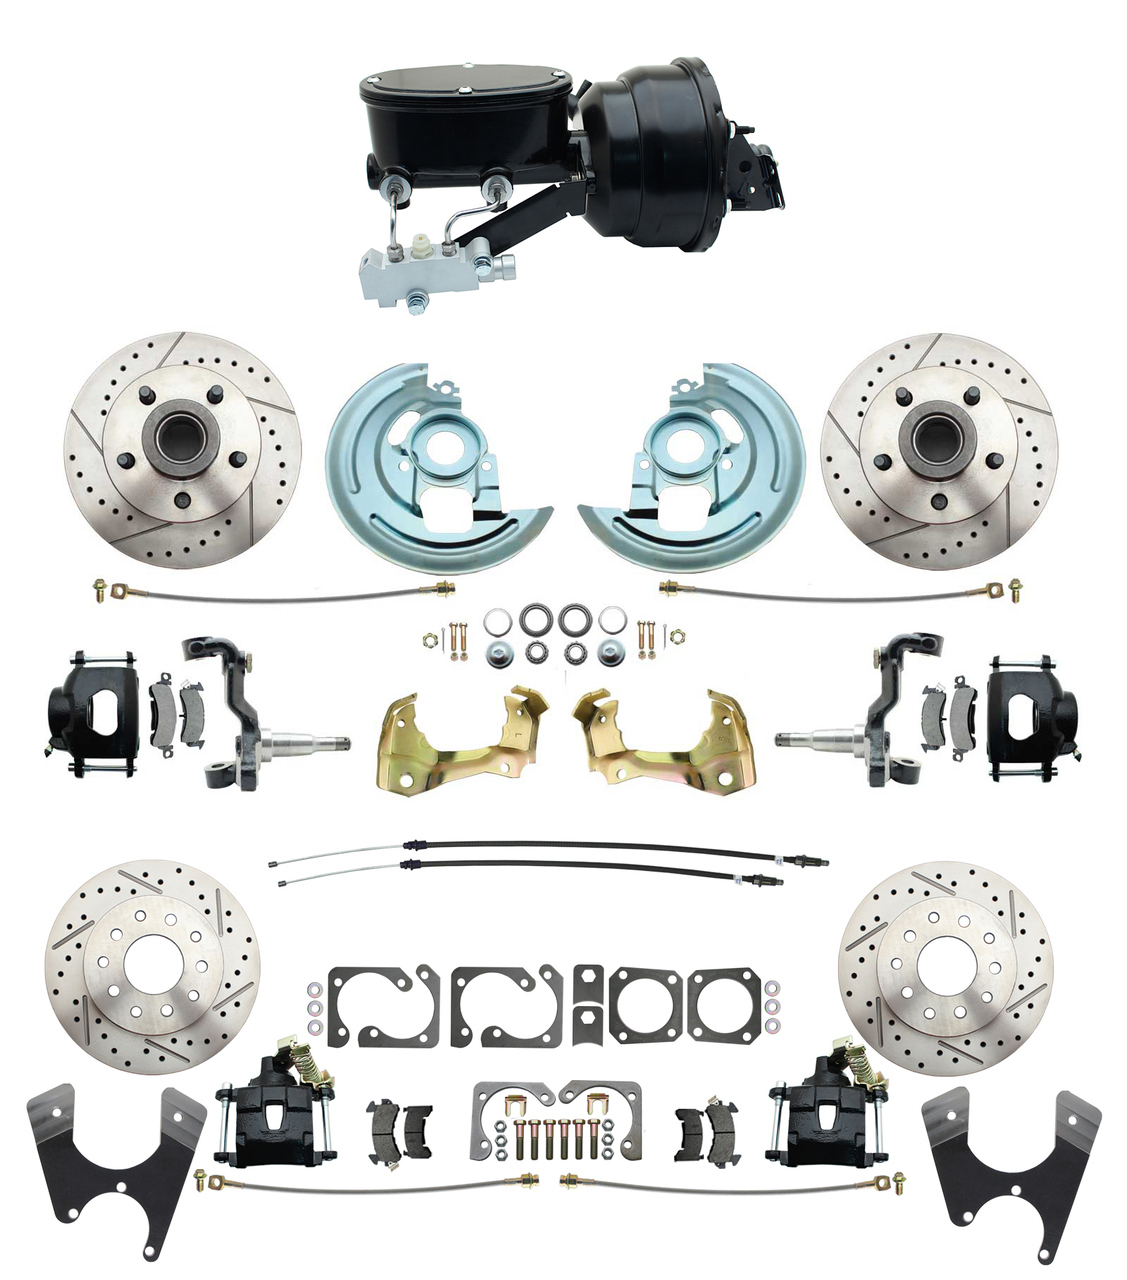 1967-1969 Camaro/ Firebird & 1968-1974 Chevy Nova Front & Rear Power Disc Brake Conversion Kit Drilled & Slotted & Powder Coated Black Calipers Rotors W/ Wilwood Style 8 Dual Powder Coated Black Booster Kit